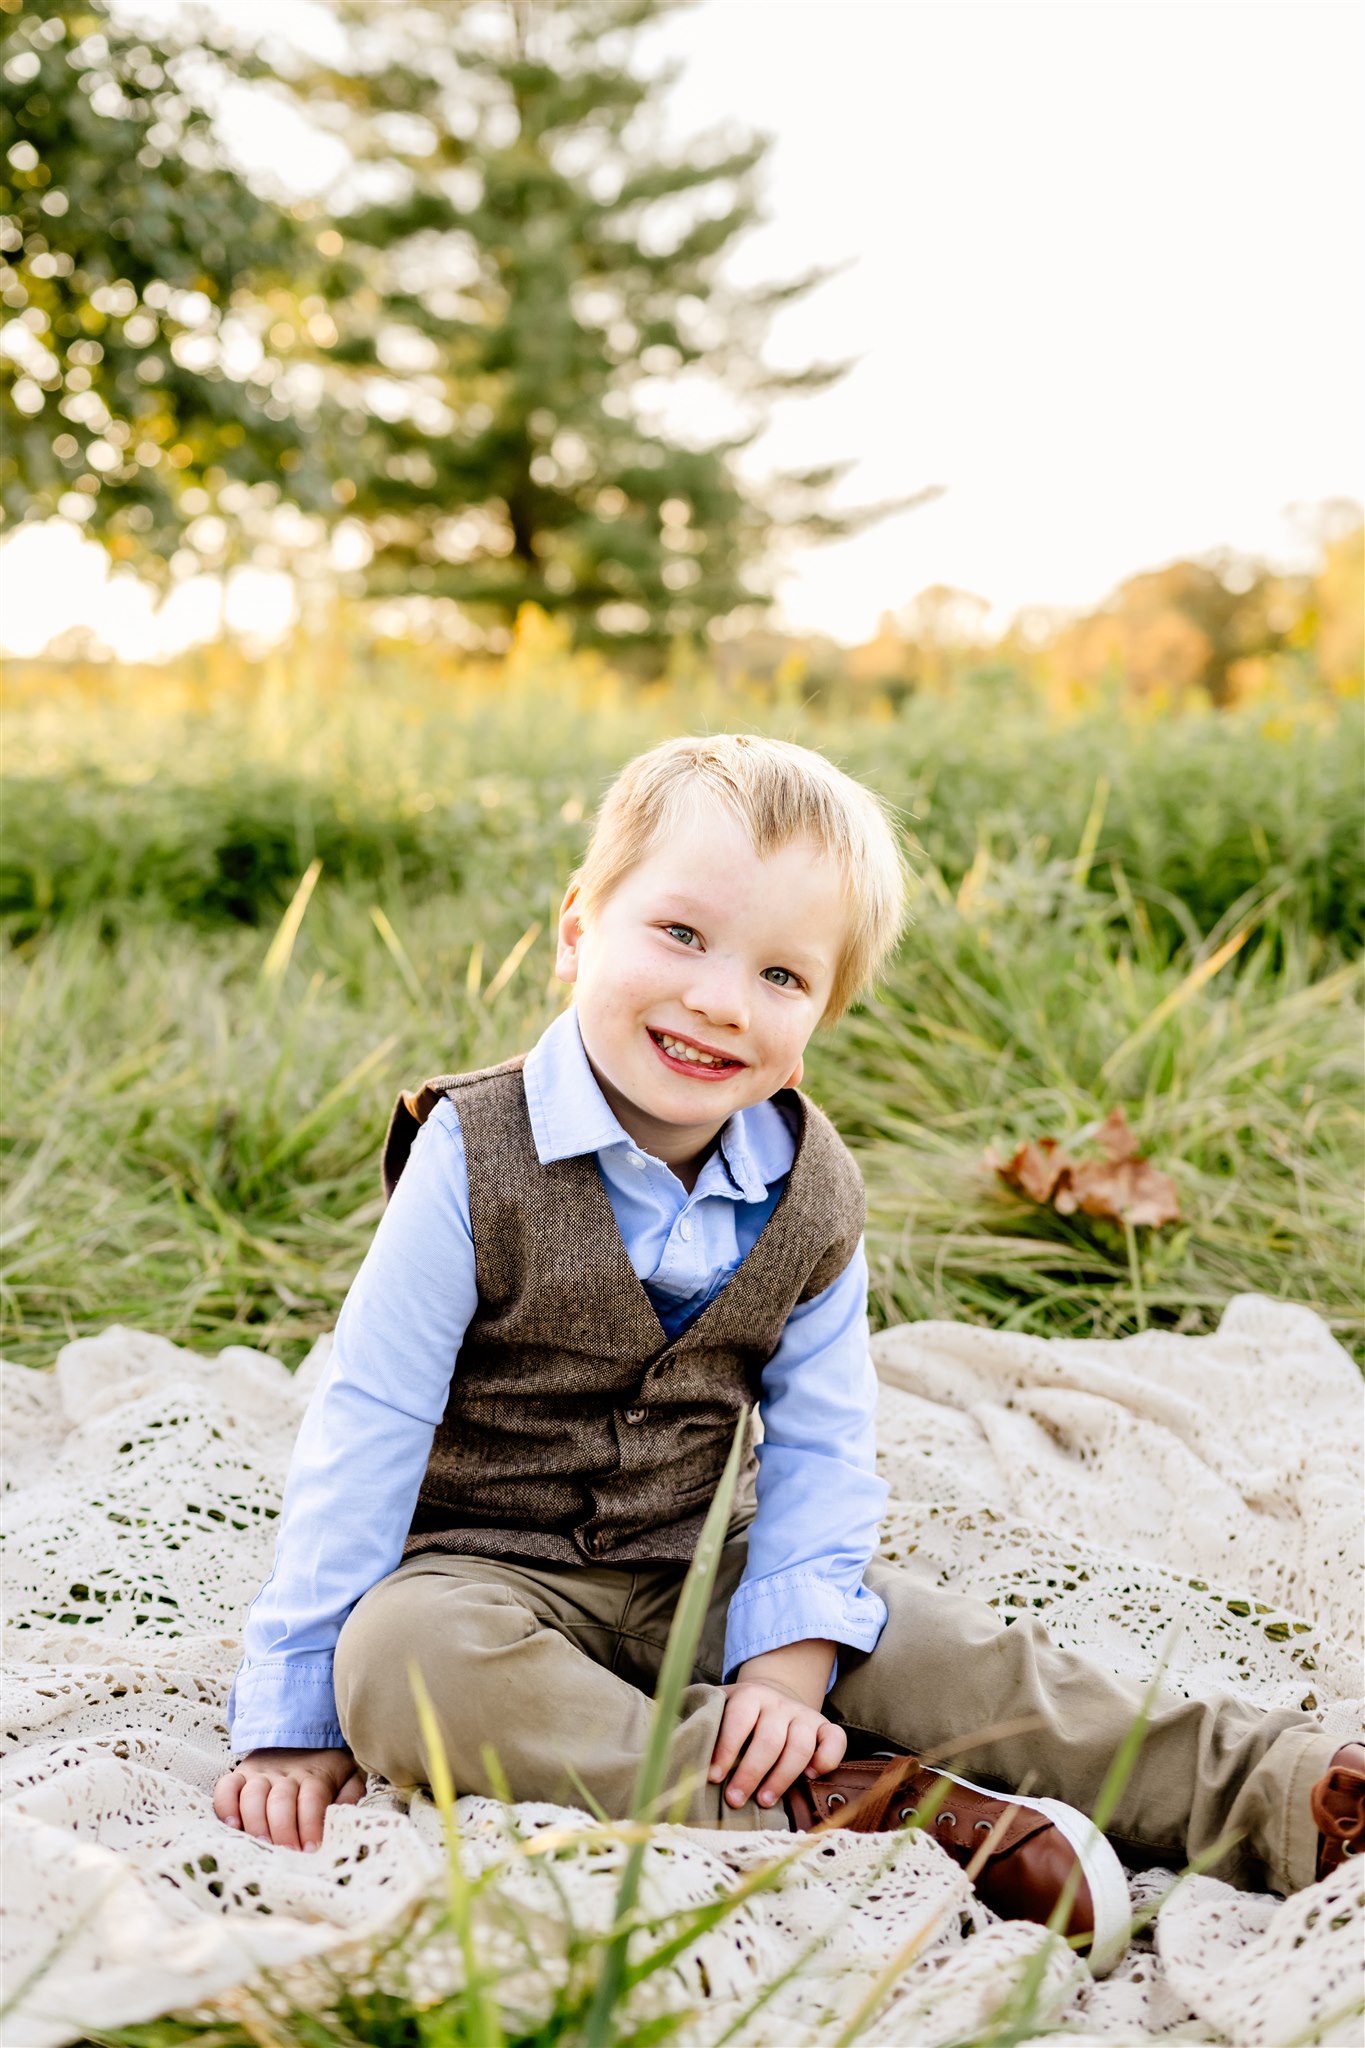 A young boy in a brown vest and blue shirt sits on a picnic blanket in a park at sunset